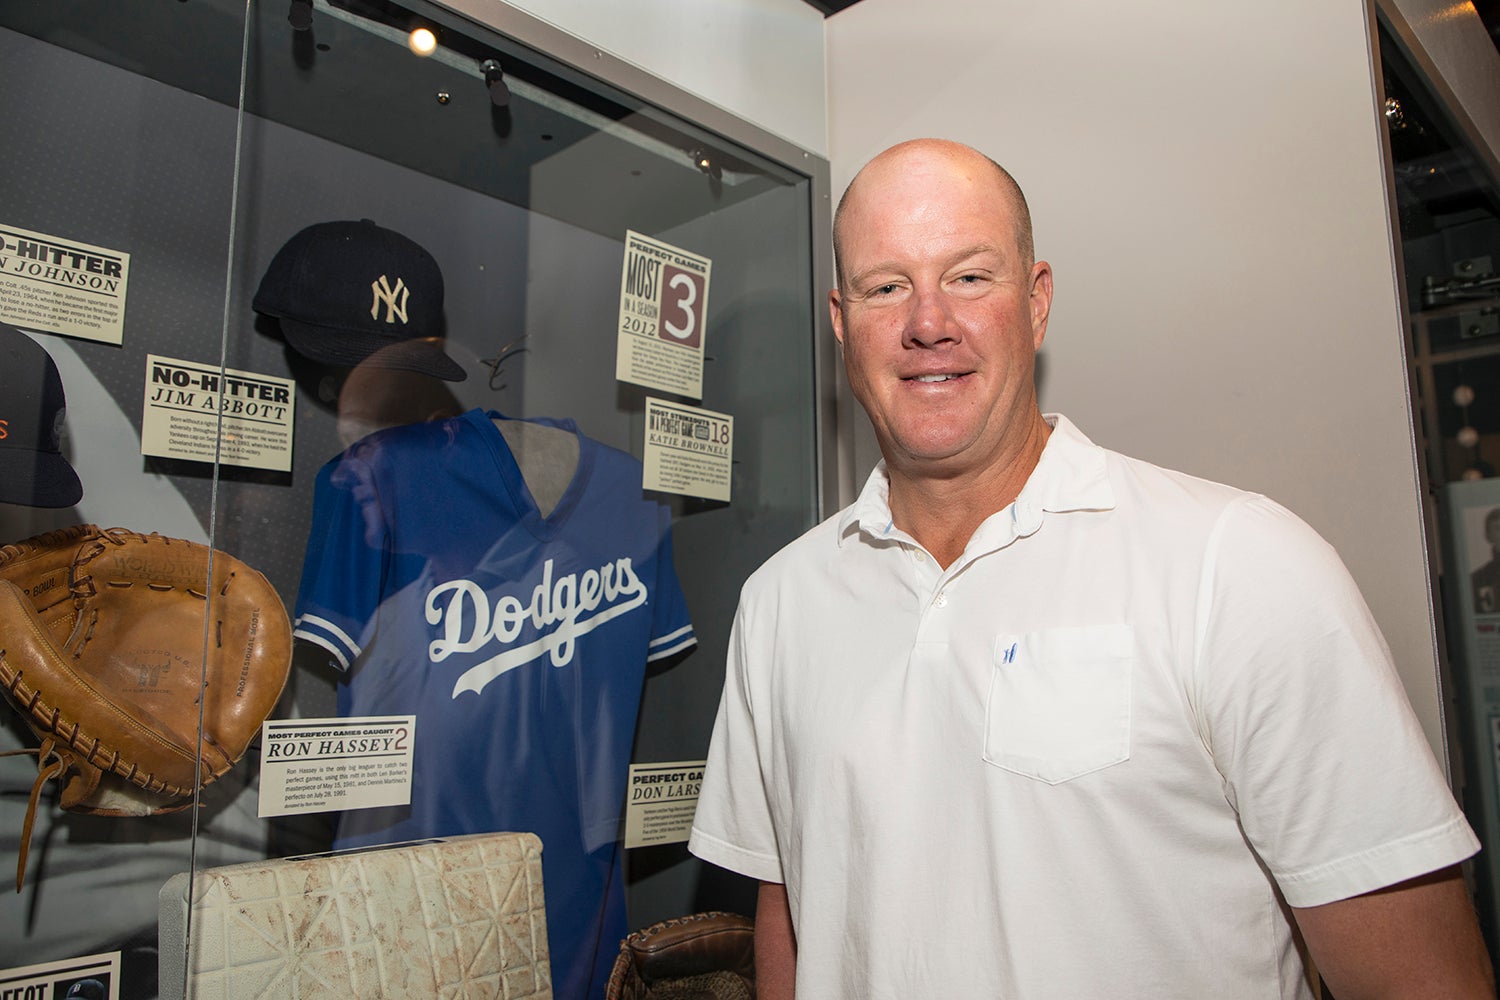 Abbott revisits his own history in Cooperstown